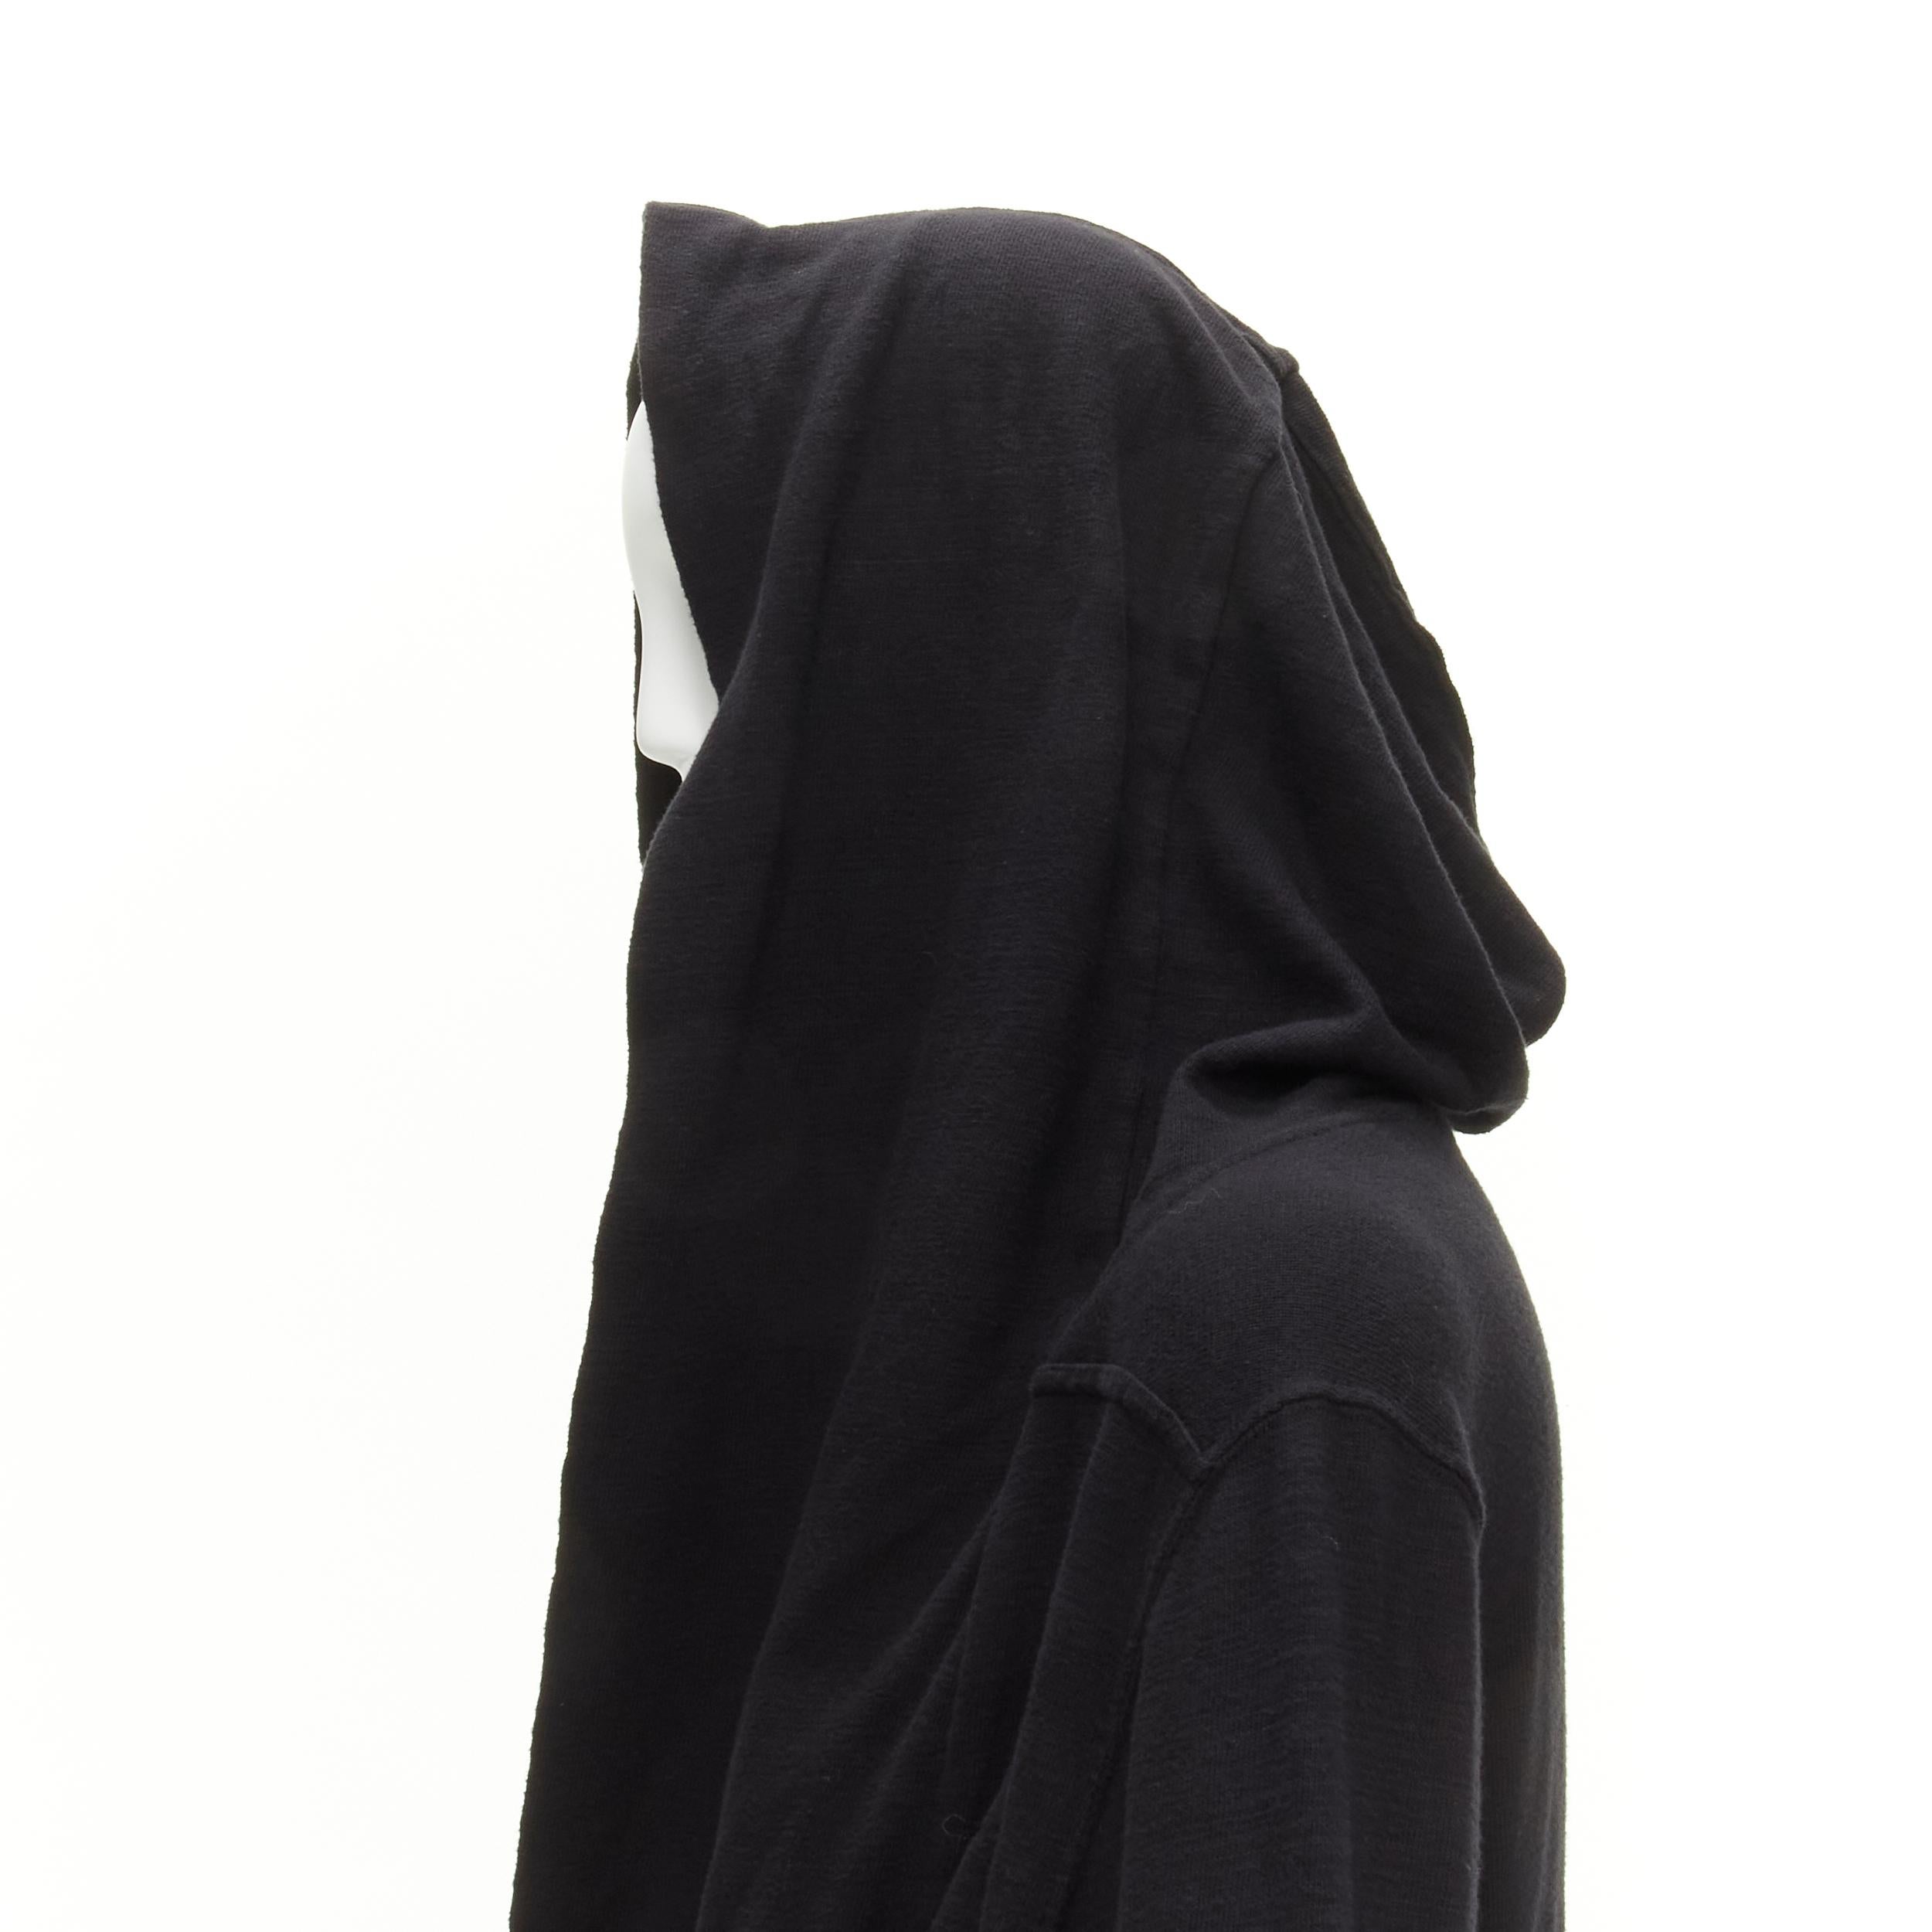 RICK OWENS DRKSHDW black cotton thick jersey hooded belted robe jacket S
Reference: TGAS/D00012
Brand: Rick Owens
Designer: Rick Owens
Collection: DRKSHDW
Material: Cotton
Color: Black
Pattern: Solid
Closure: Belt
Extra Details: Oversized deep hood